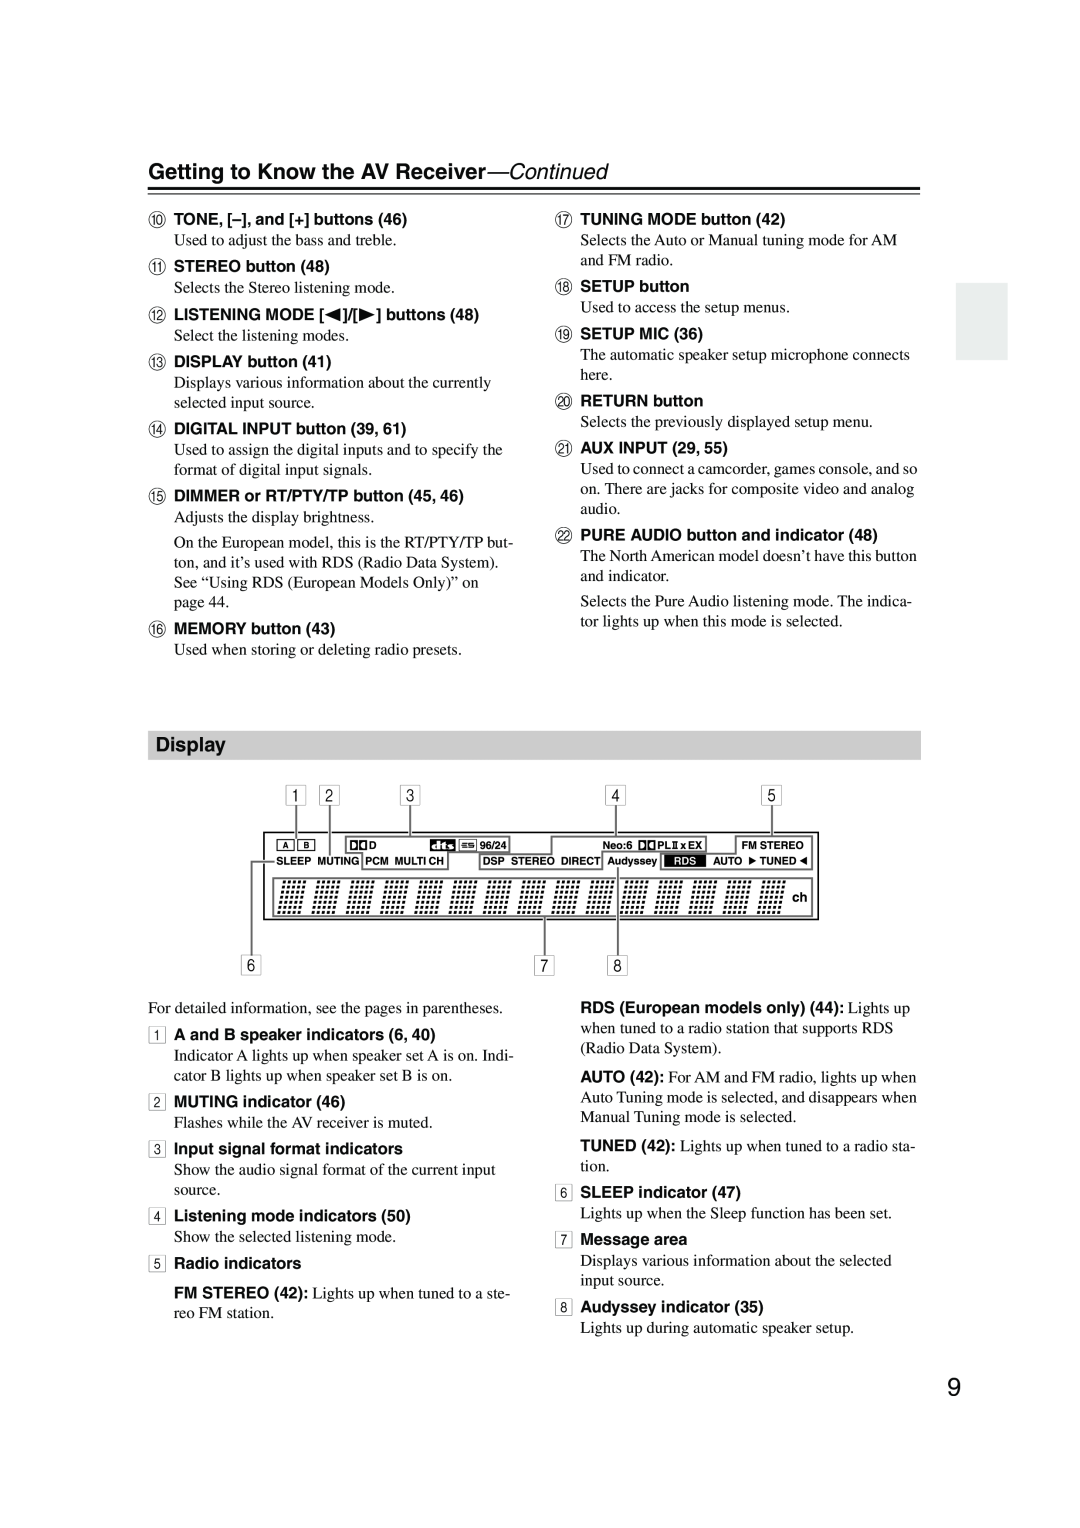 Onkyo SR575, TX-SR8550, TX-SR505E instruction manual Getting to Know the AV Receiver-Continued, Display 